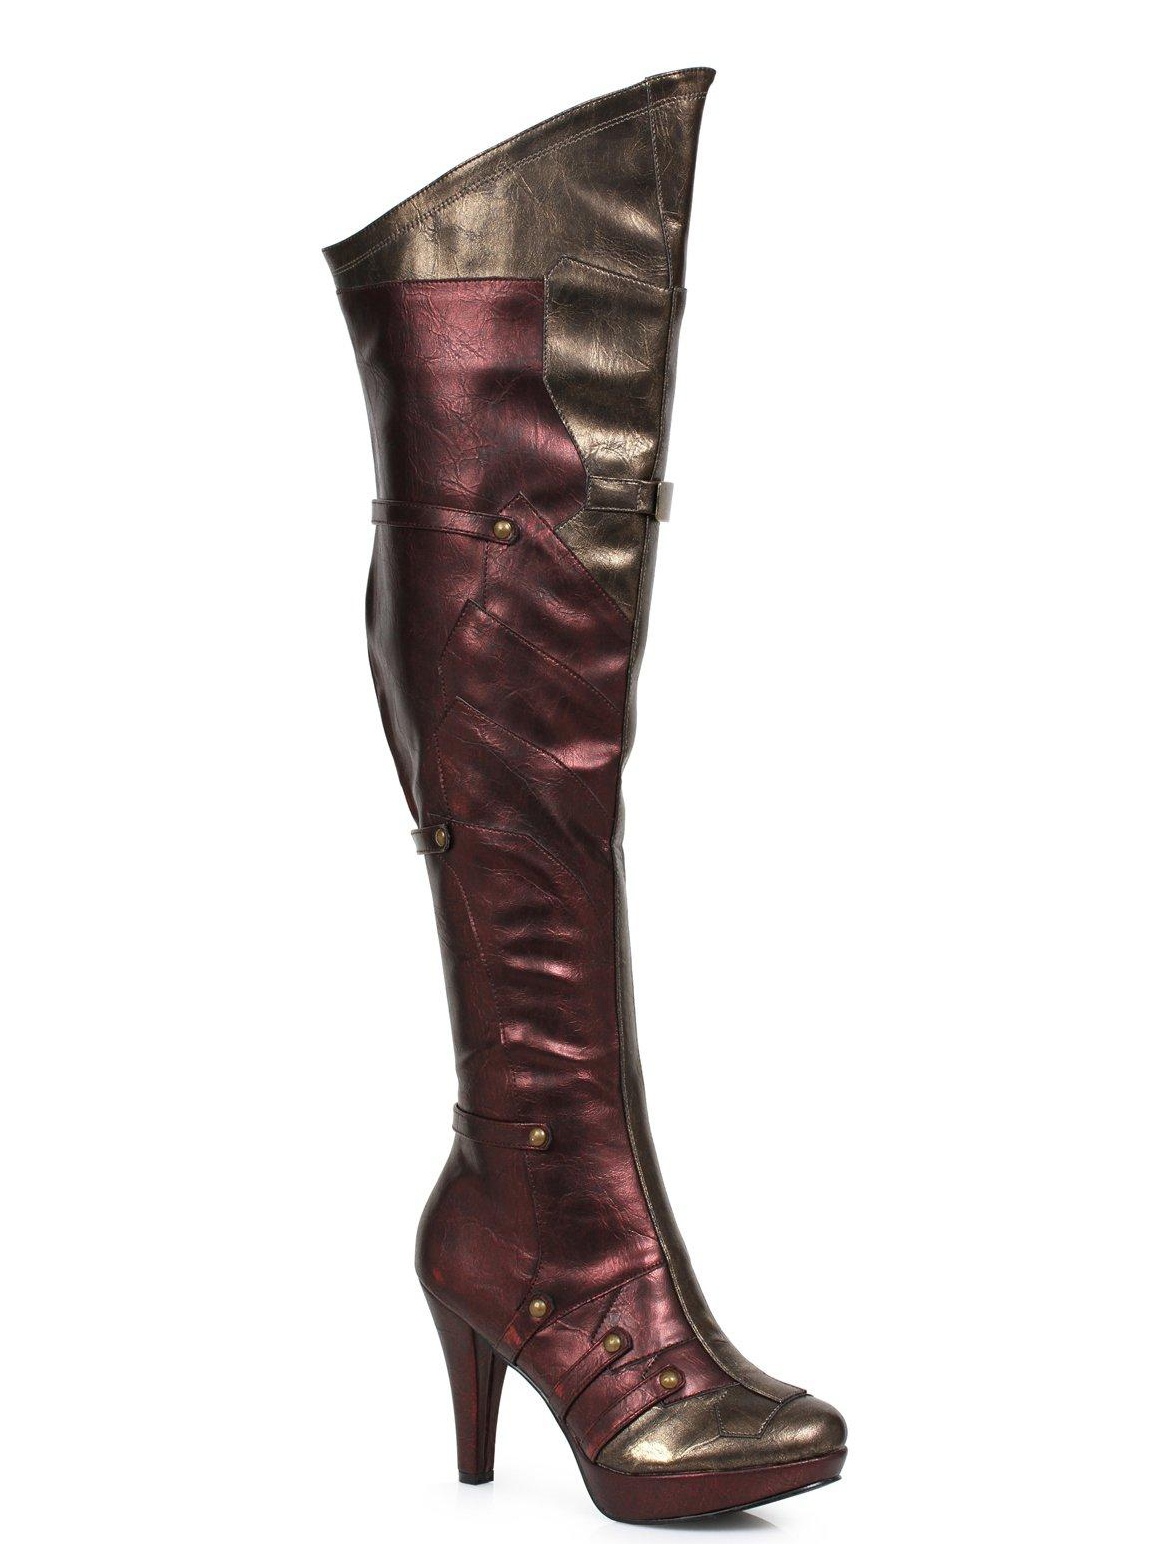 Women's Thigh High Boots - image 1 of 2